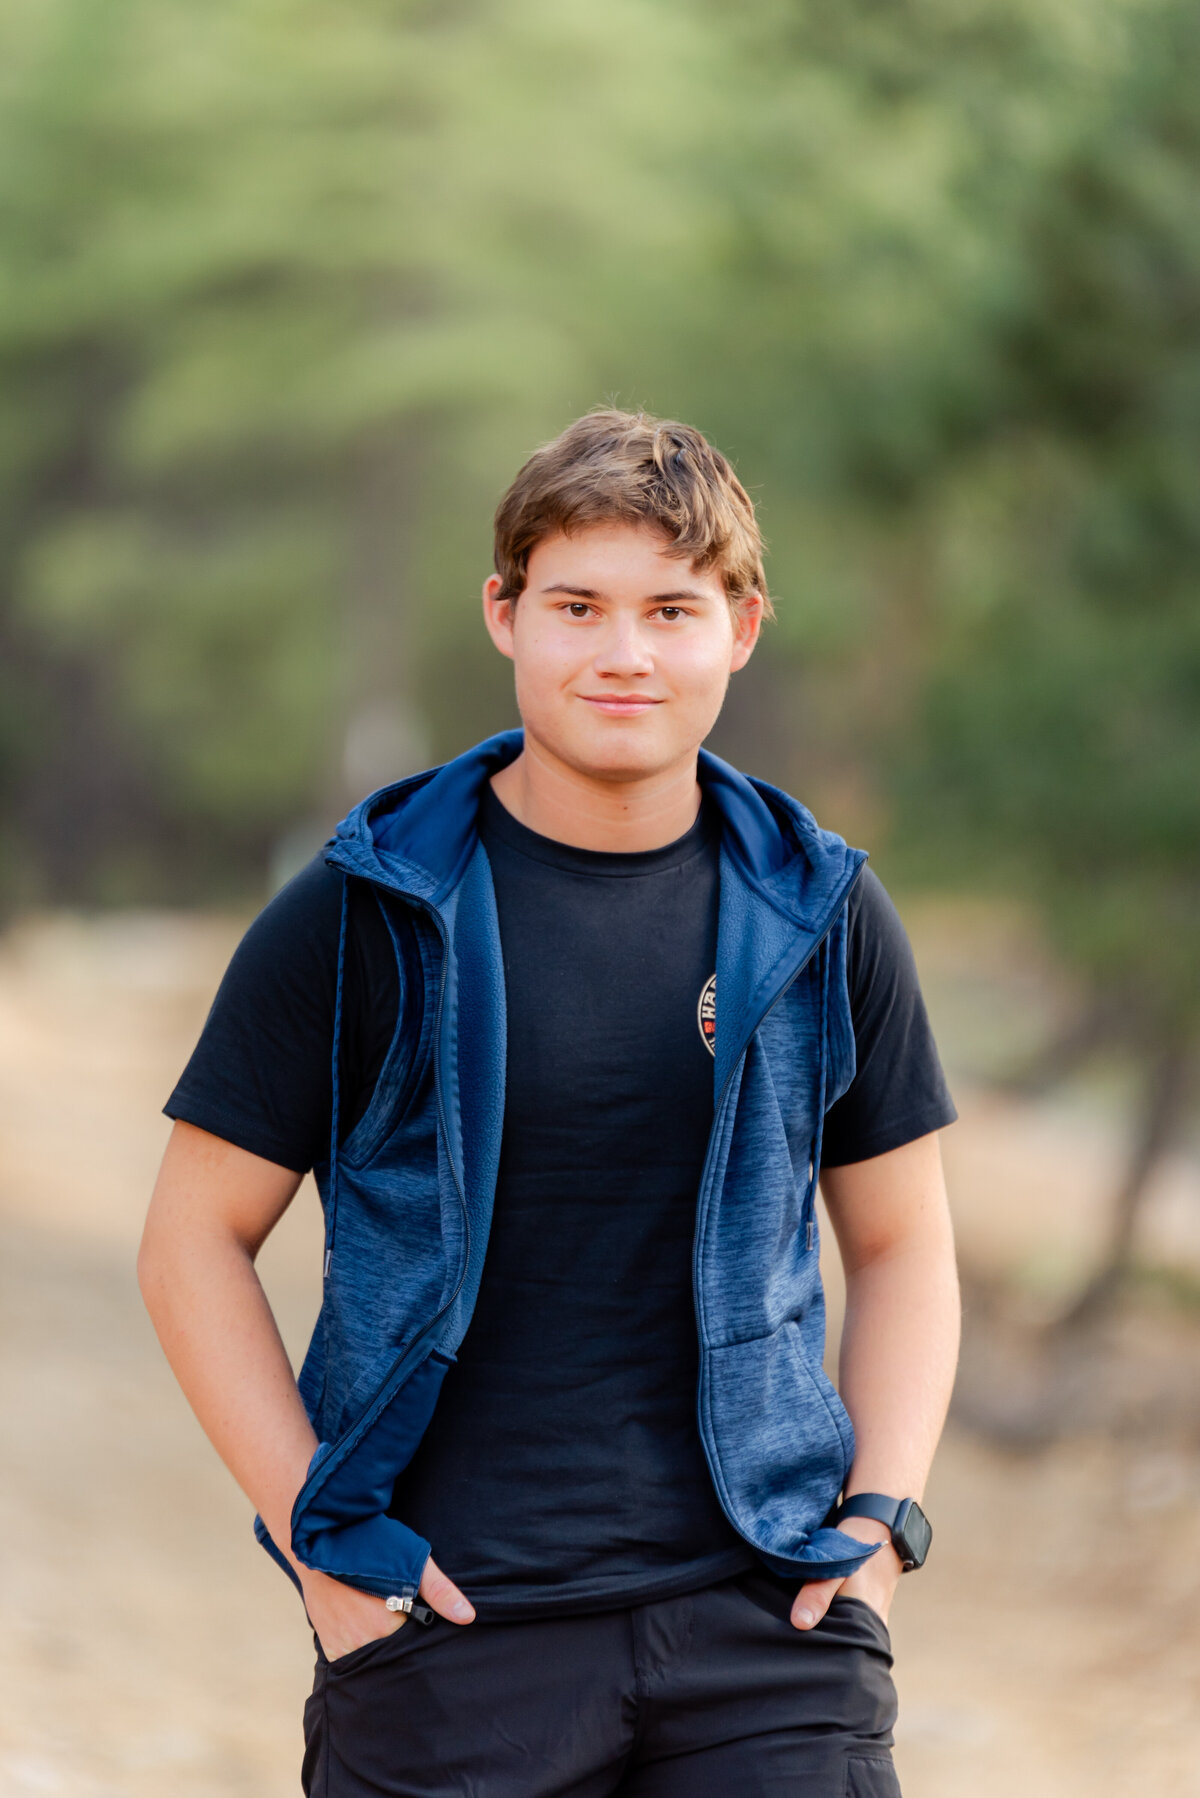 High School Senior Photography Session in the Hualapai Mountains - Ashley Durham Photography - Brayden Bowers-3